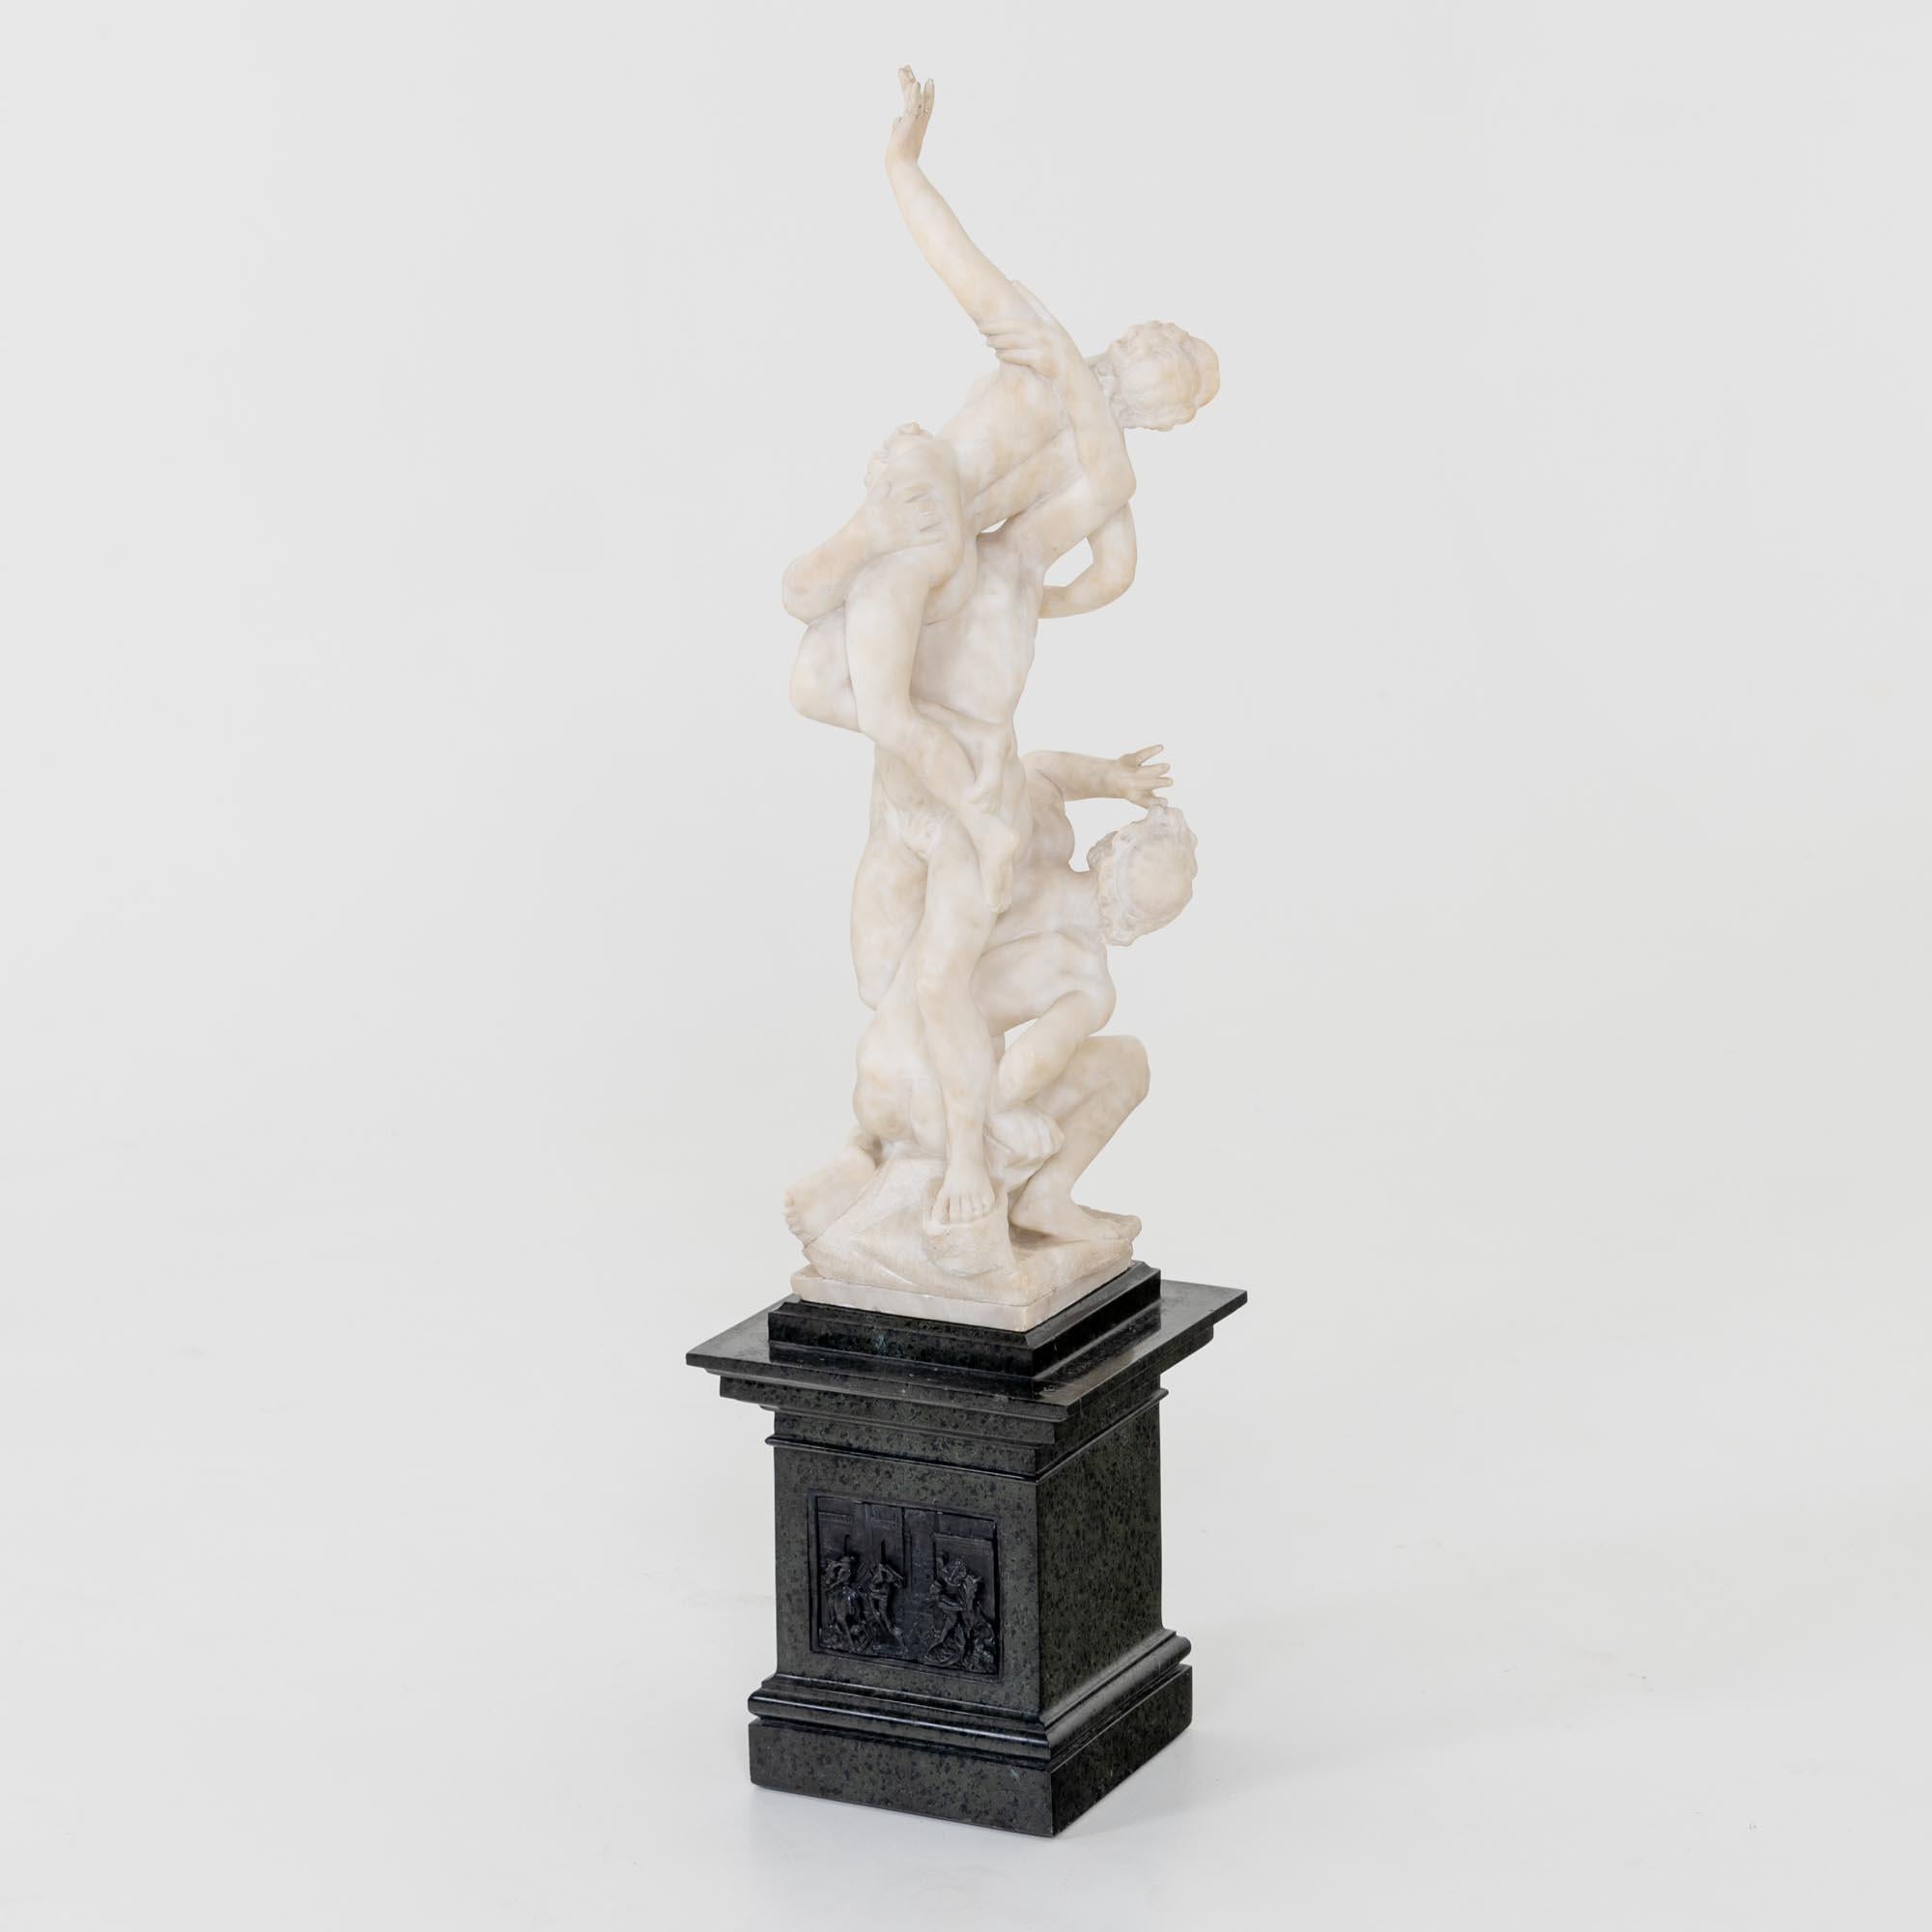 Marble sculpture based on the famous original by Giambologna (Jean de Bologne), the Rape of the Sabine Women, from 1579. This version is from the 19th century and mounted on a square pedestal of dark marble in the Renaissance style.